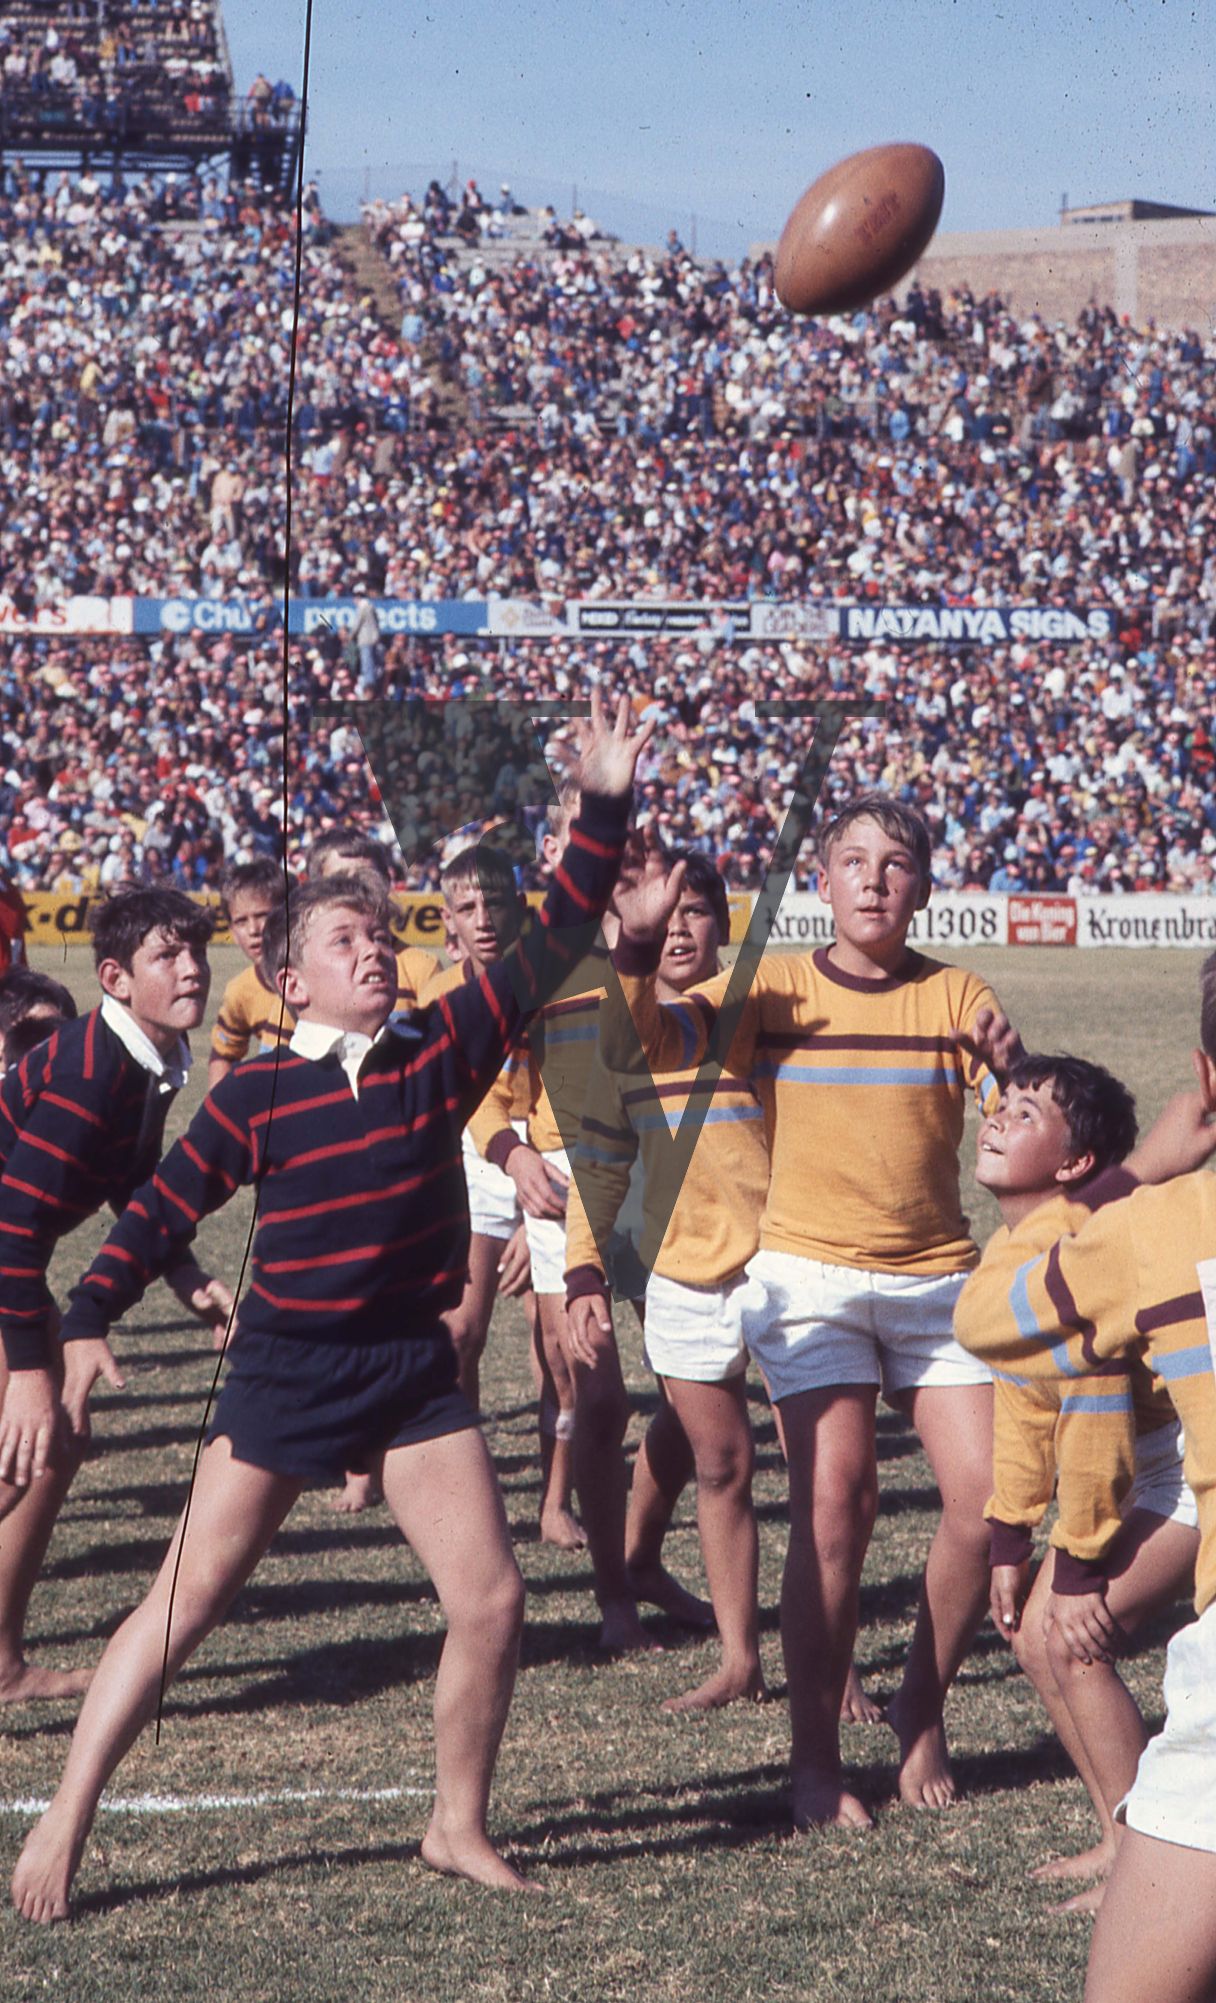 South Africa, rugby match, young white boys, barefoot.